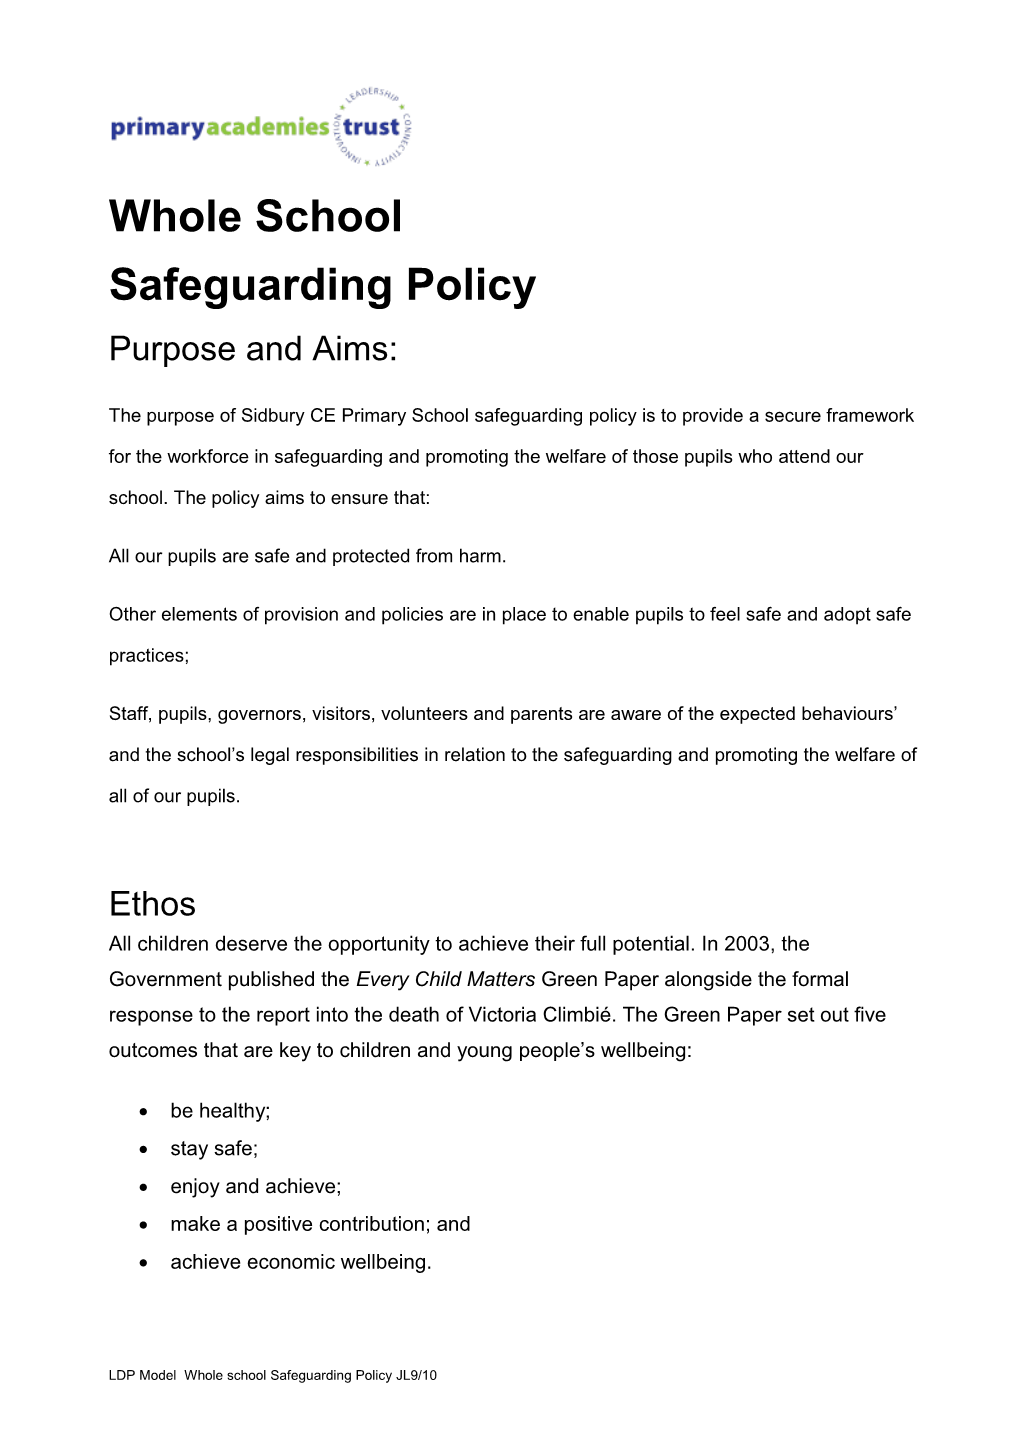 Whole School Safeguarding Policy